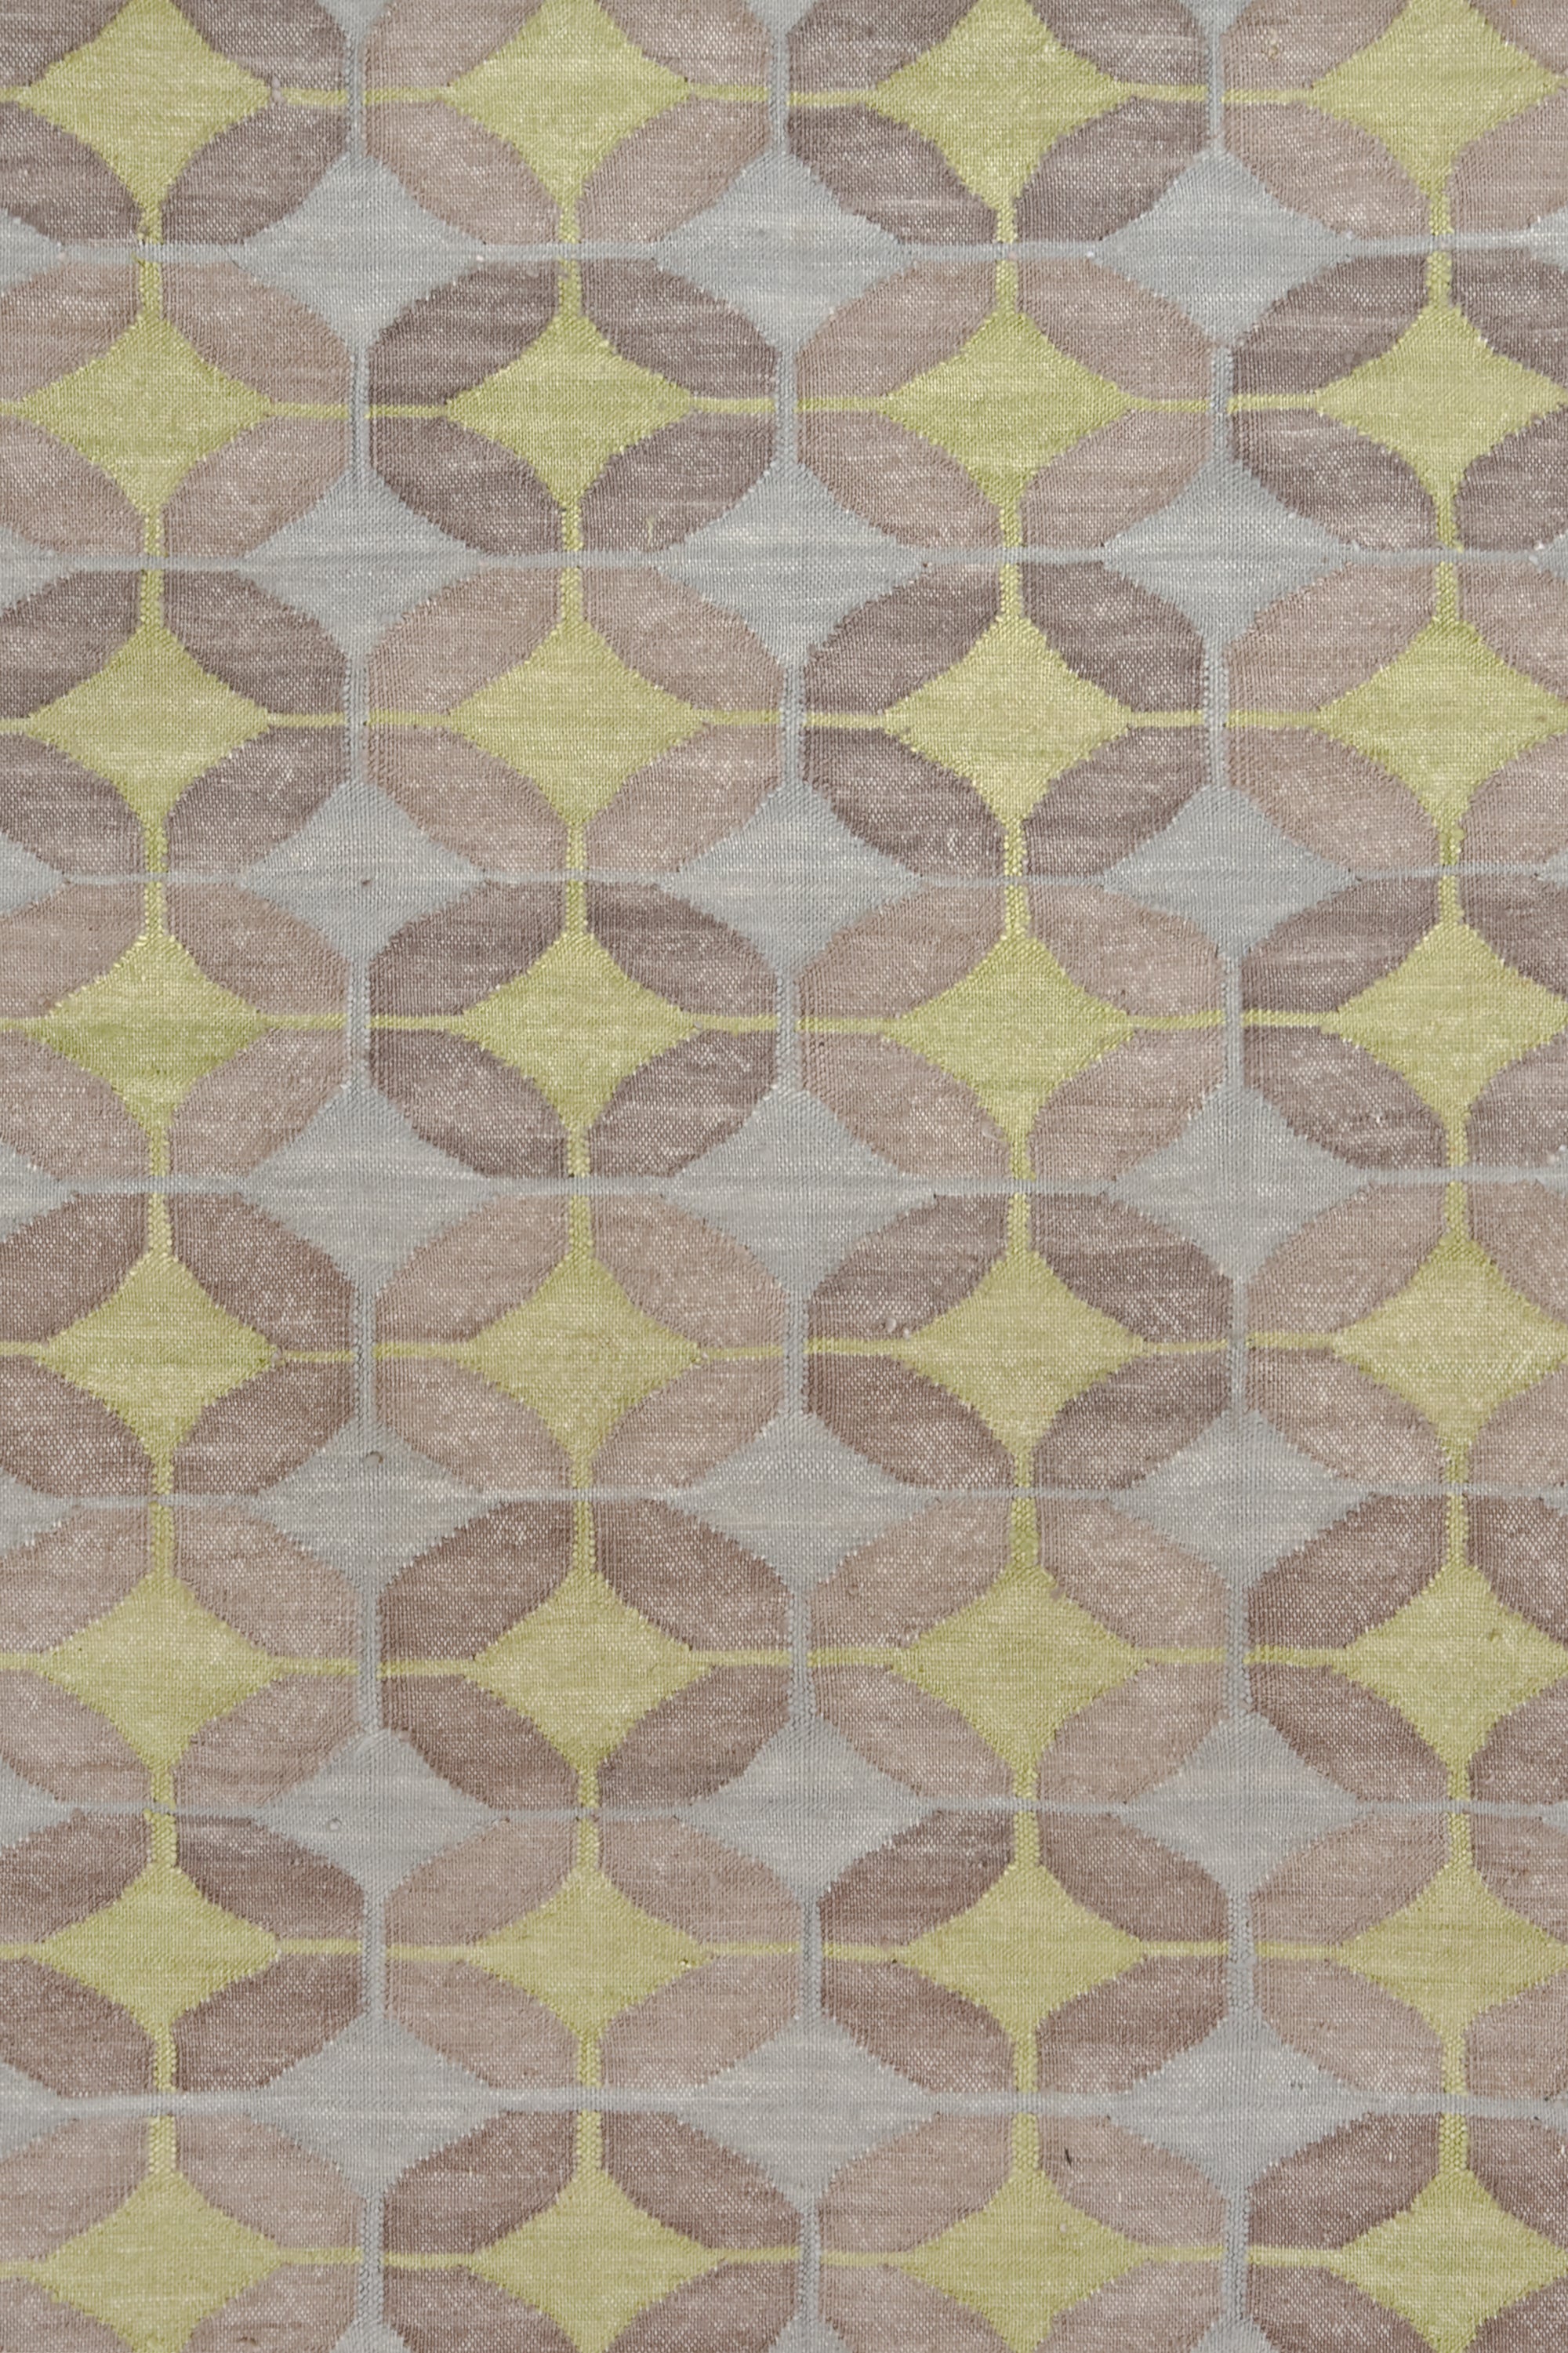 Petite Alhambra Rug featuring a pattern of linked circles that create a star like lattice in yellow and pale blue on a taupe field. 